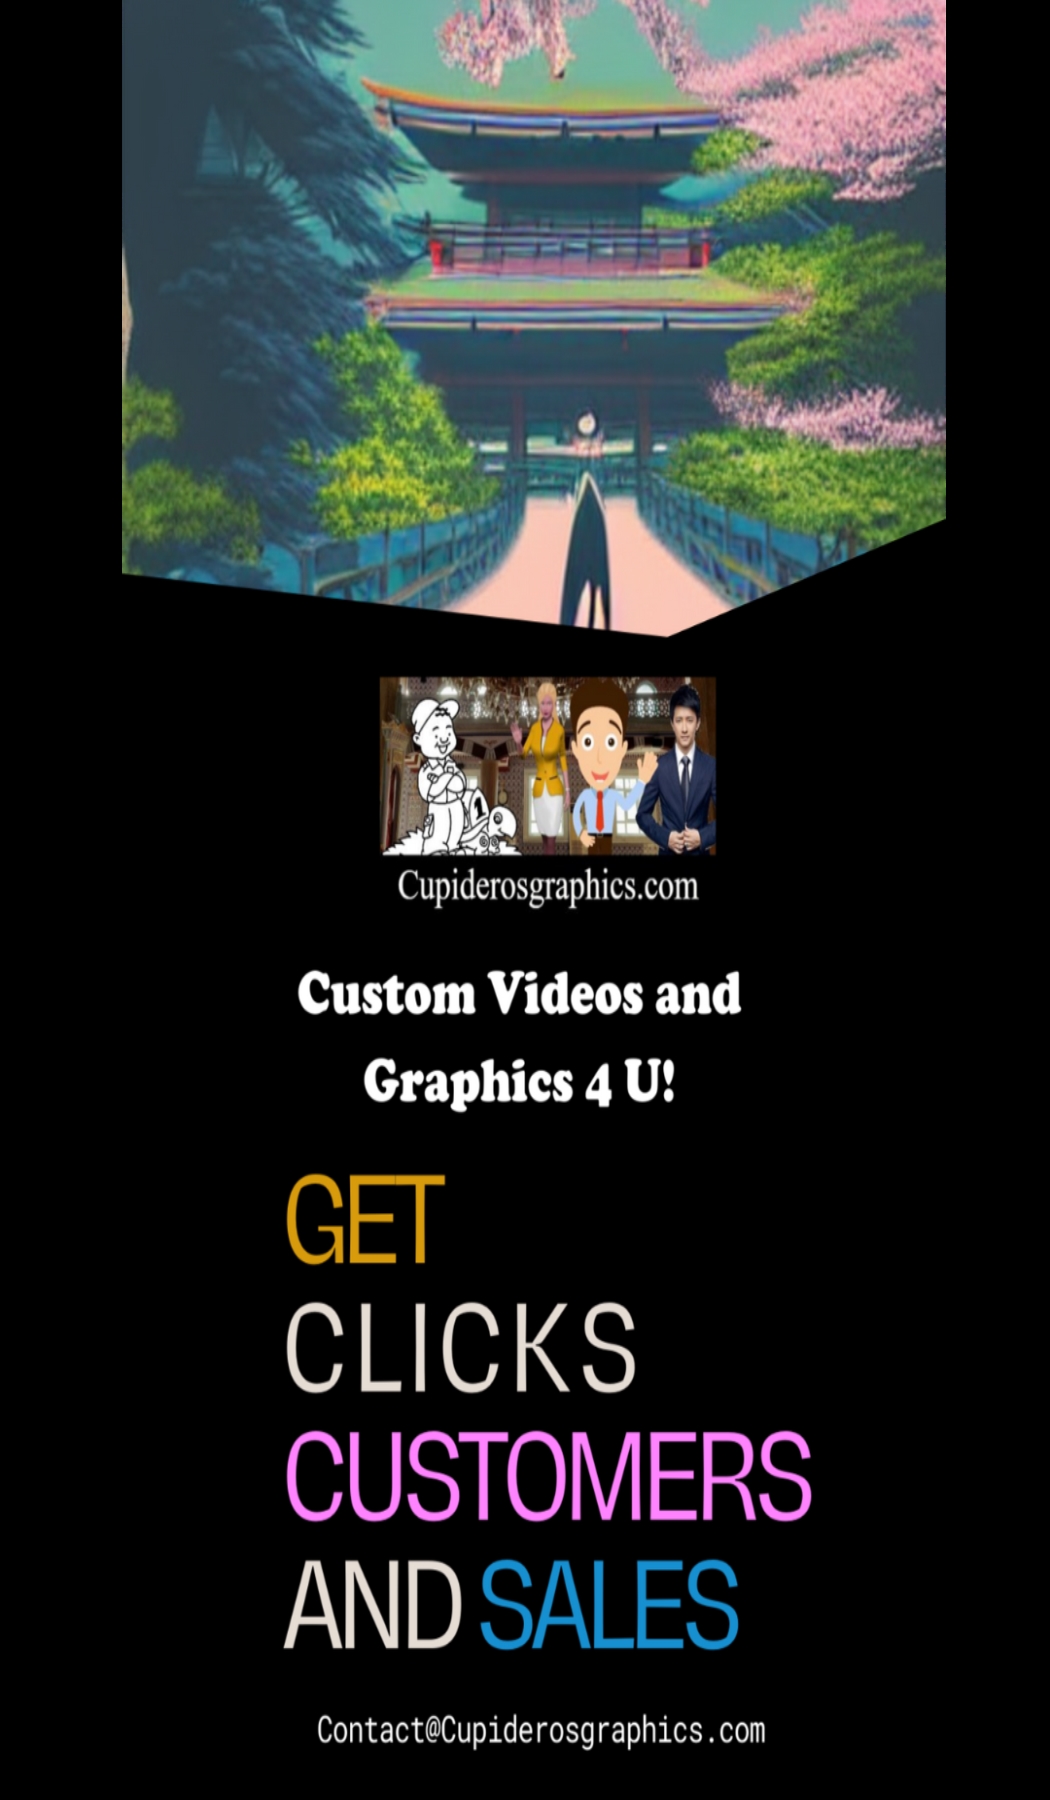 Get Clicks, Customers, and Sales